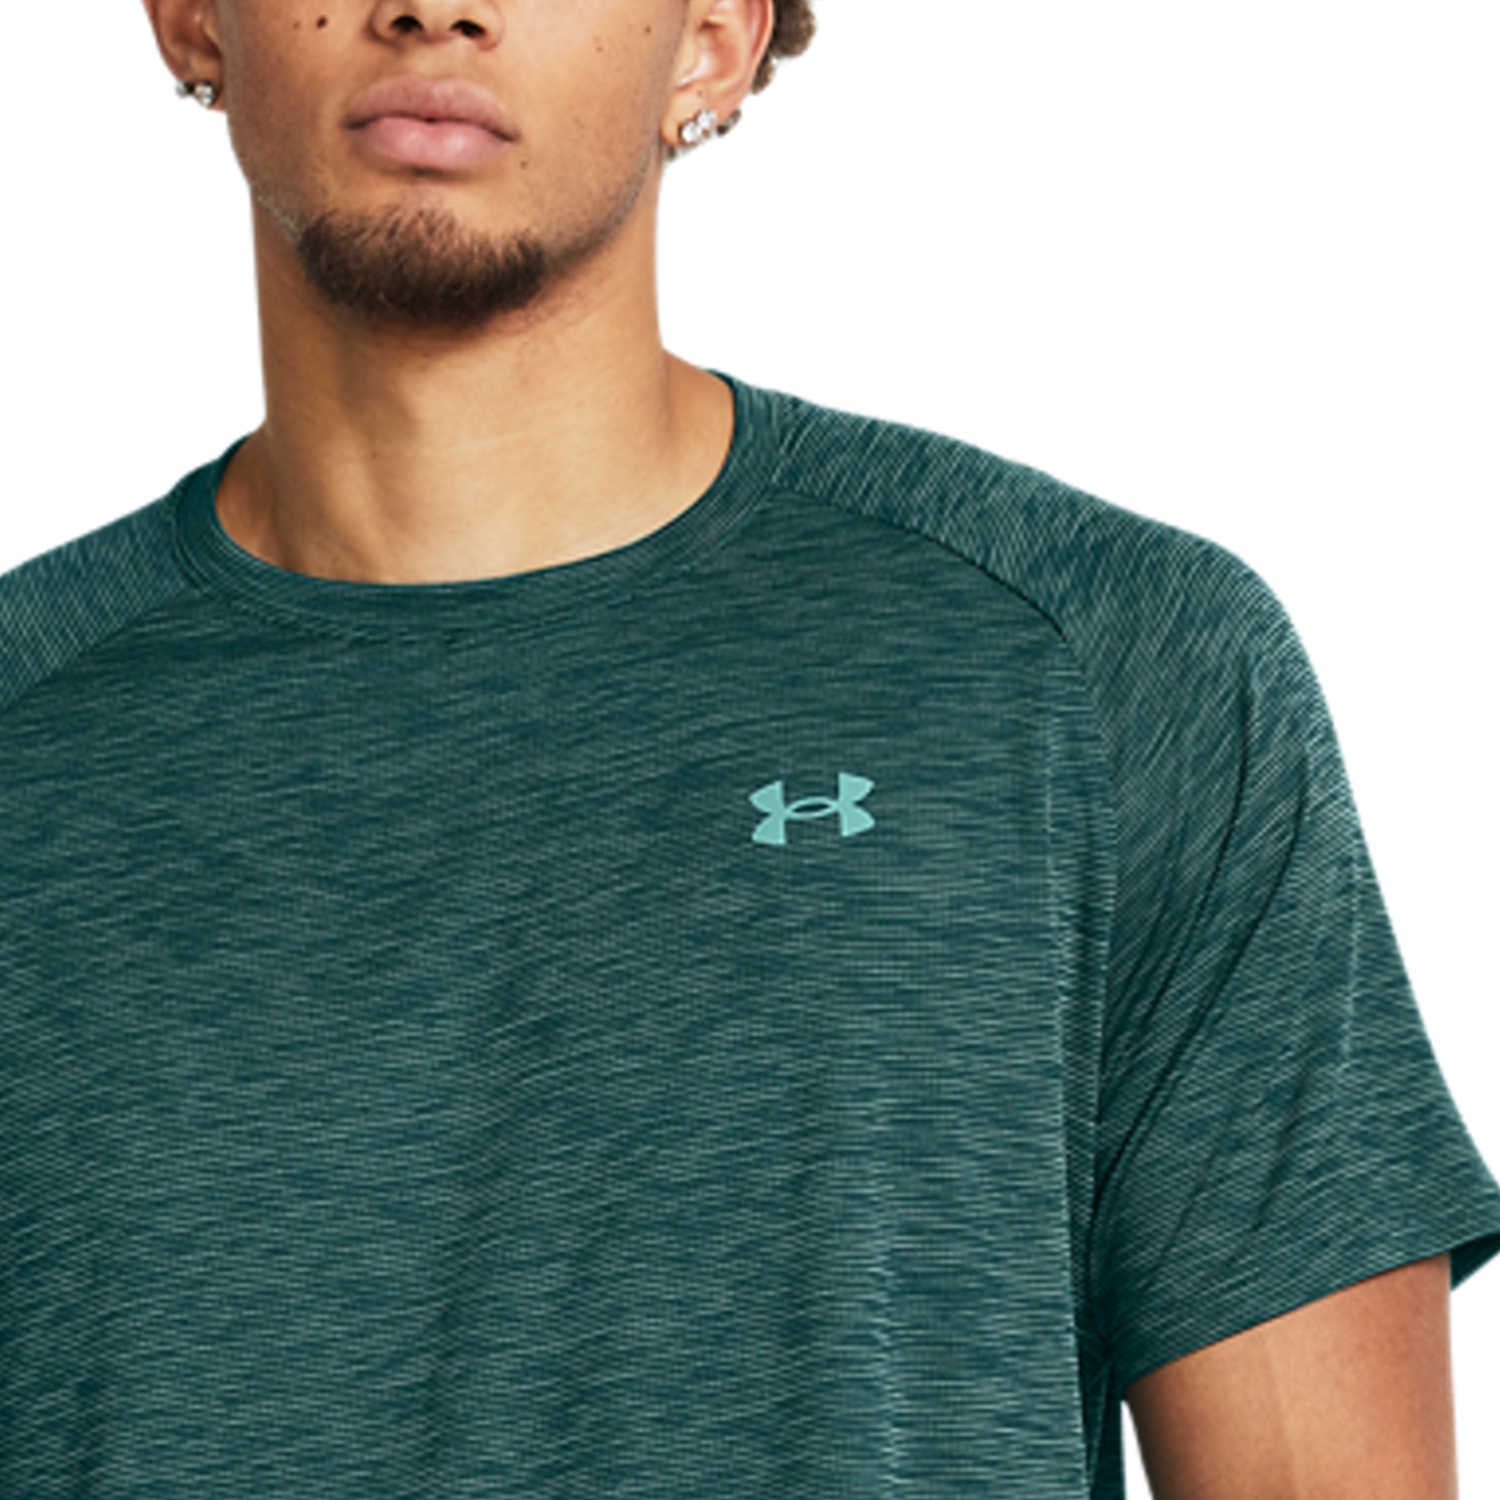 Under Armour Textured Maglietta - Hydro Teal/Radial Turquoise